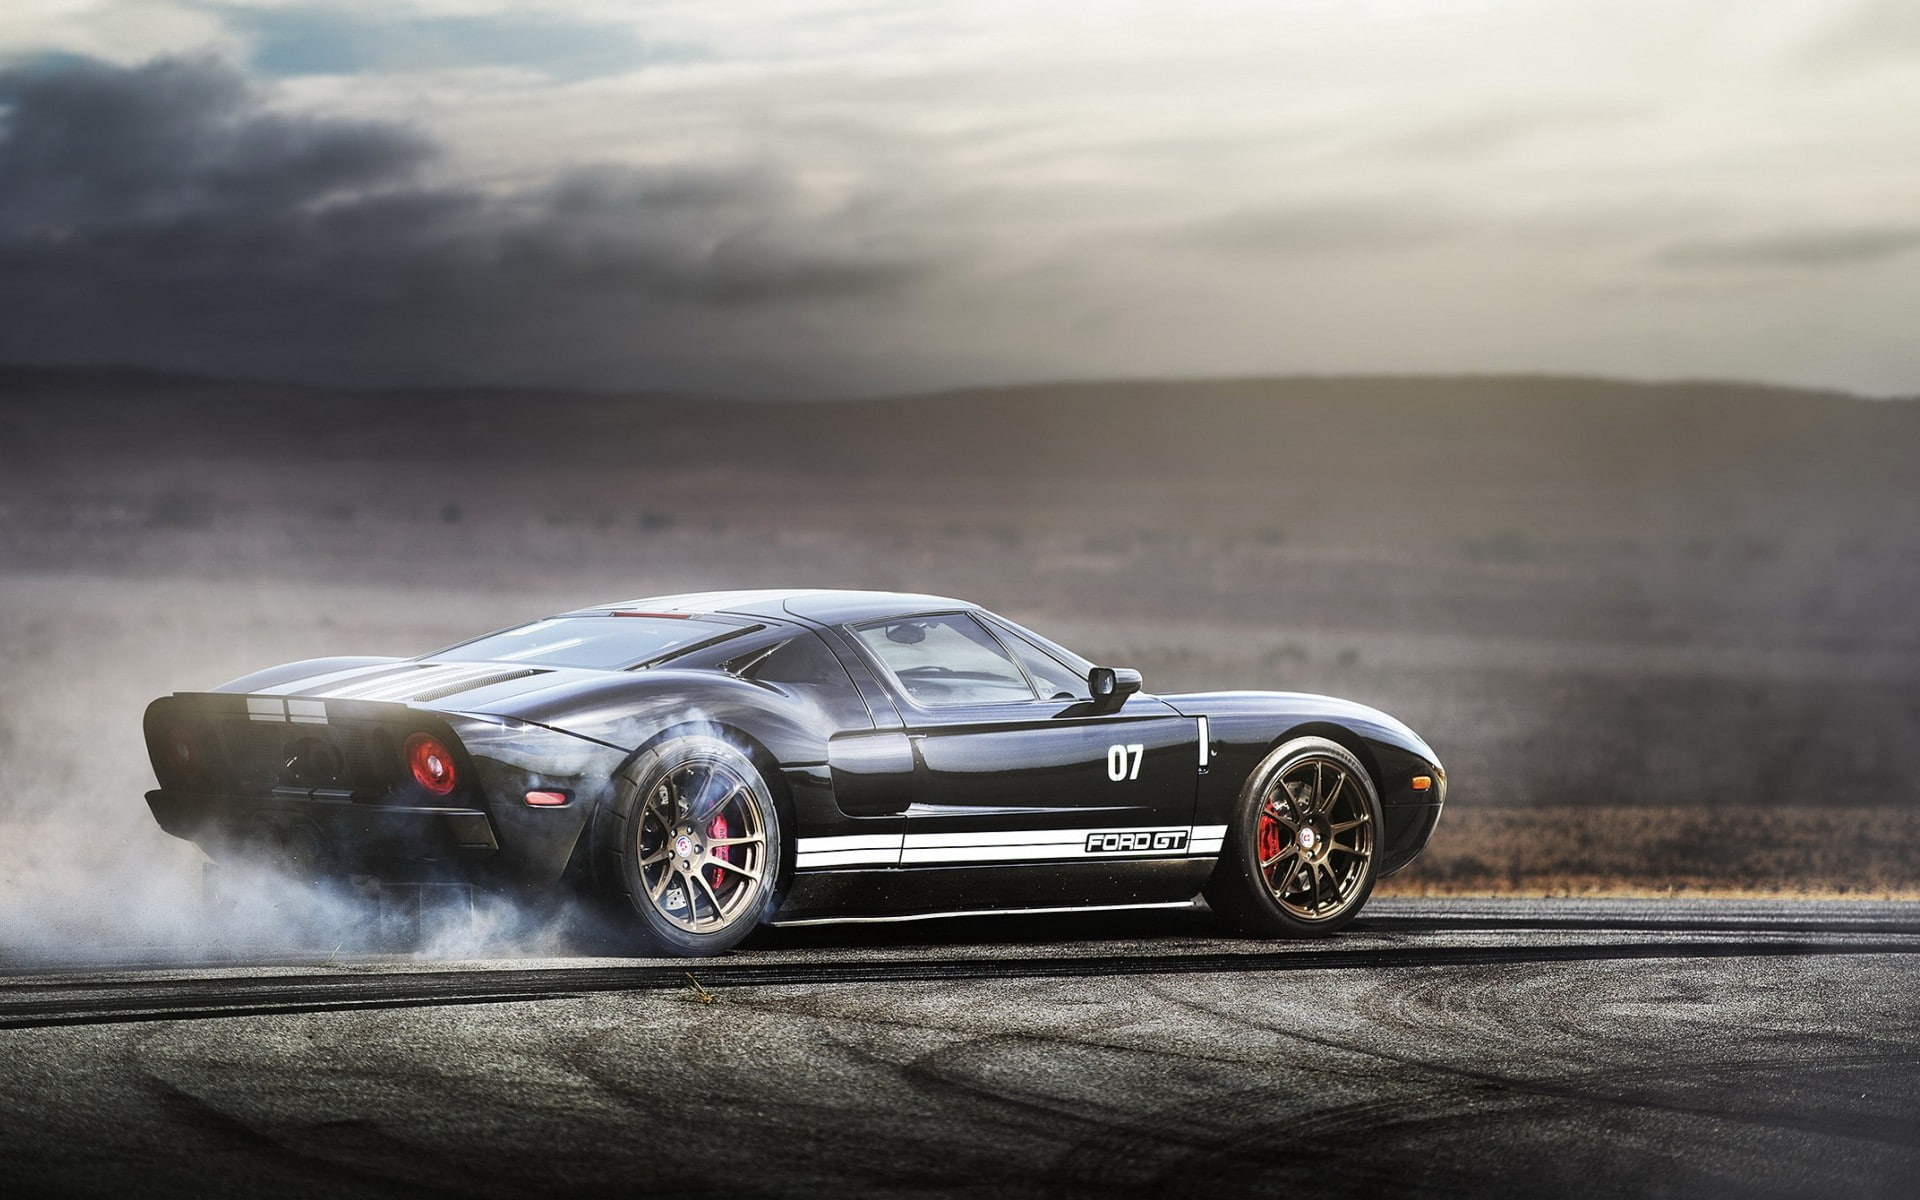 Ford, Ford GT, car, vehicle, mode of transportation, motor vehicle